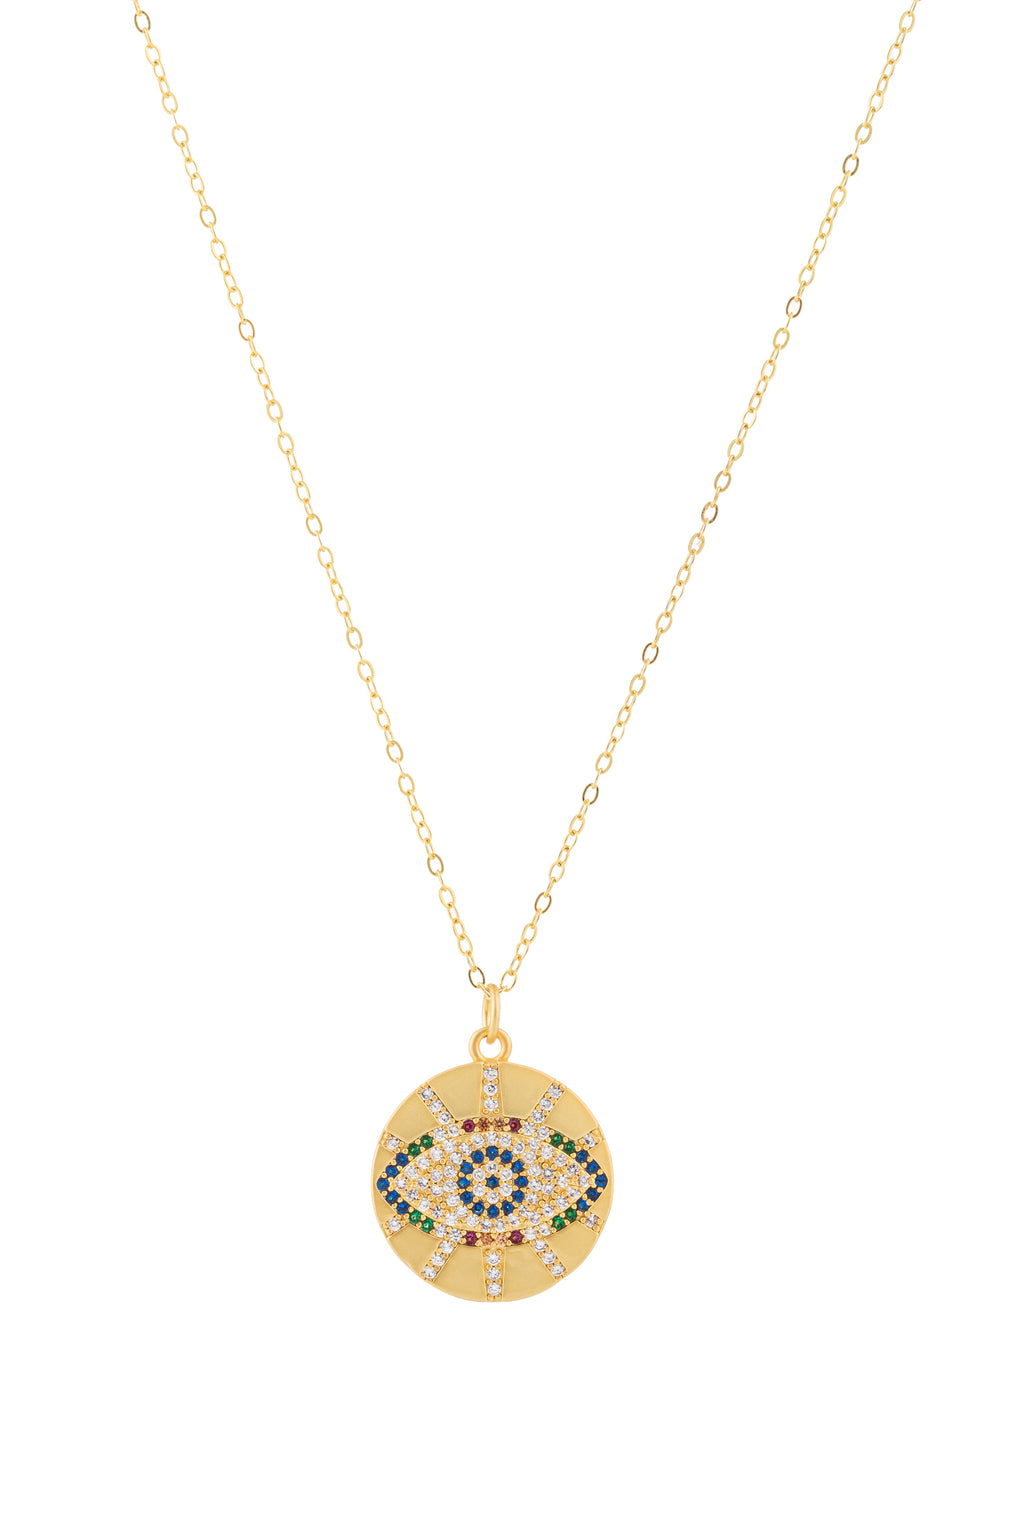 Sterling silver chain necklace with an evil eye brass pendant & CZ crystals.